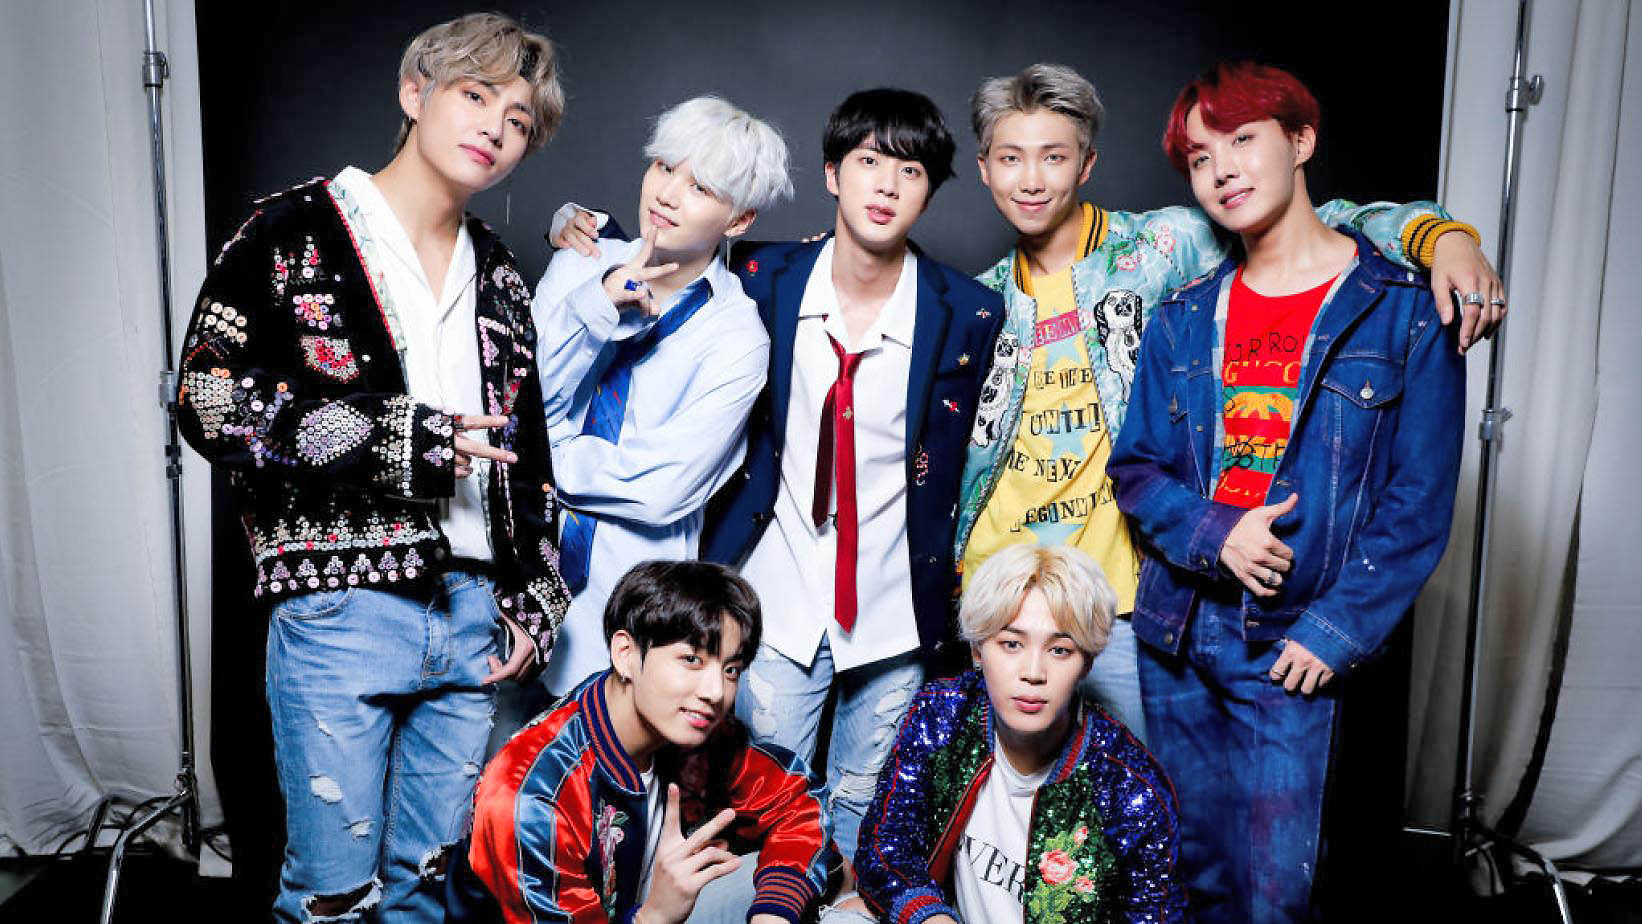 BTS 'DNA' music video hit 600 million views for the first time by KPOP group